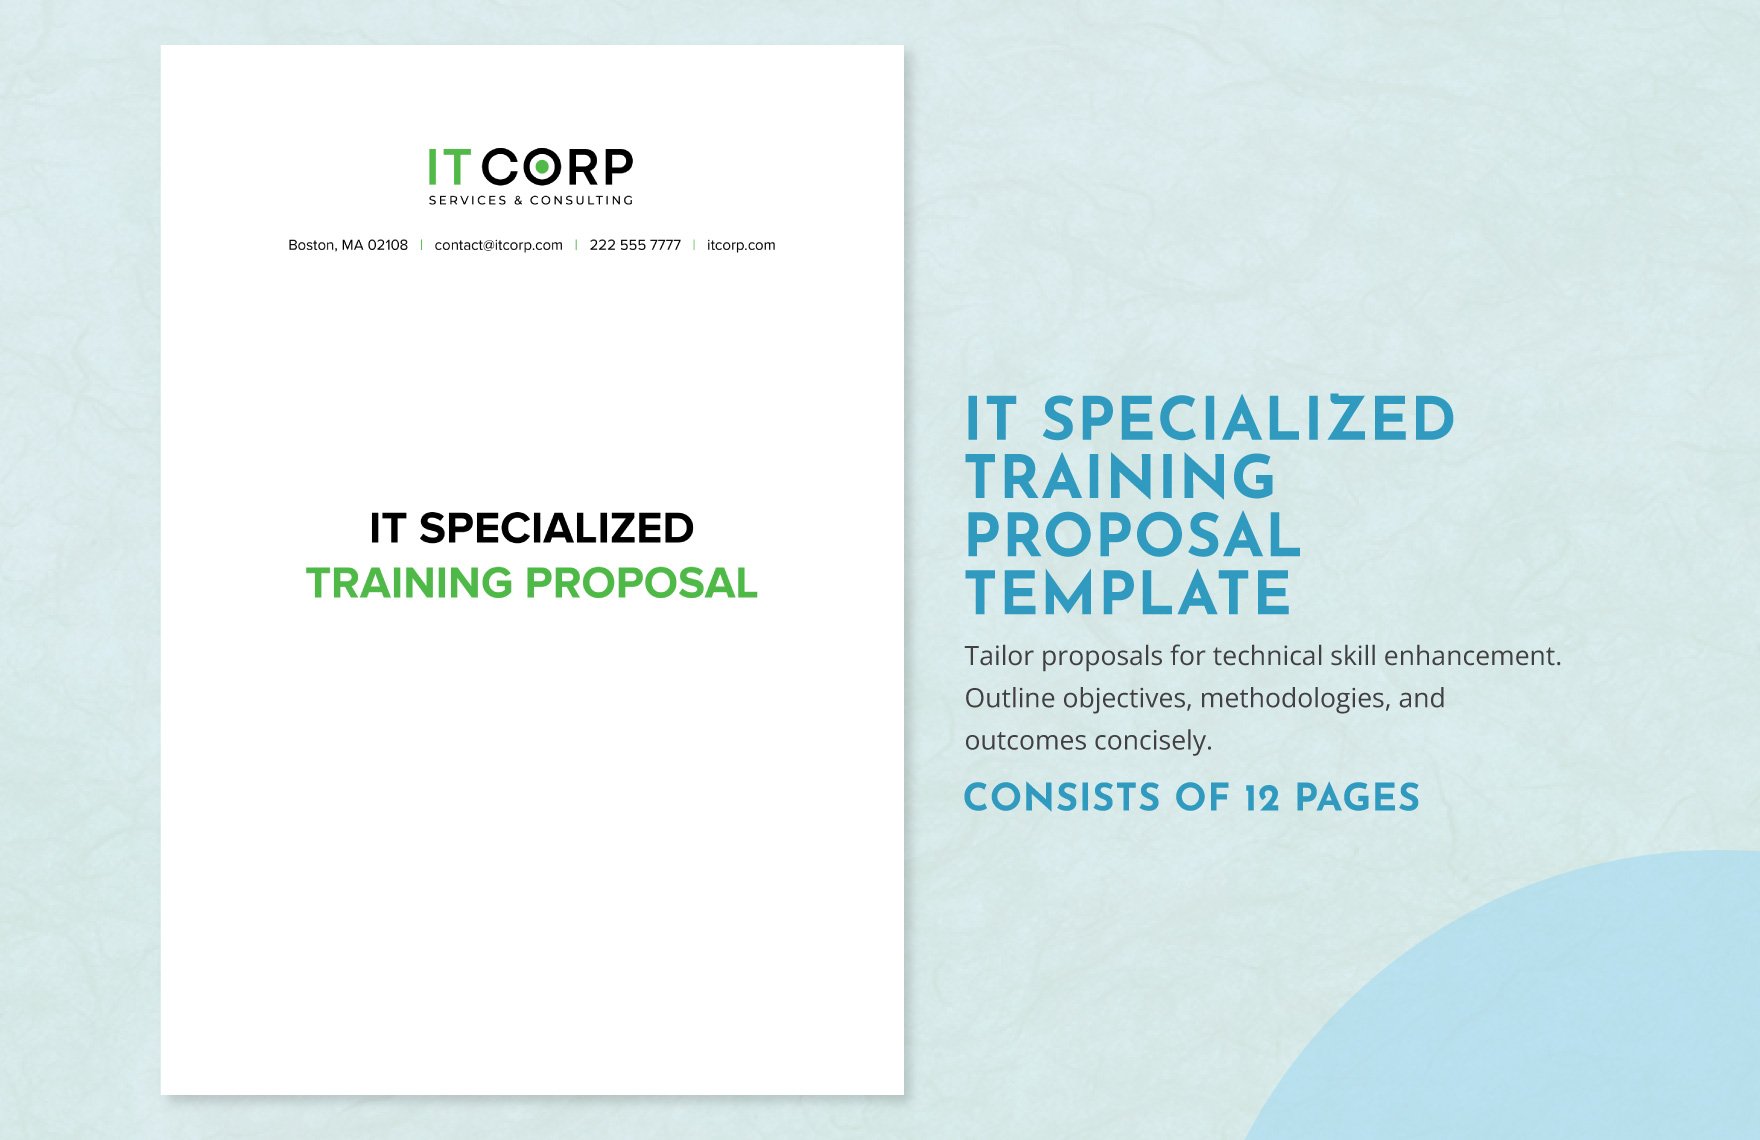 IT Specialized Training Proposal Template in Word, Google Docs, PDF